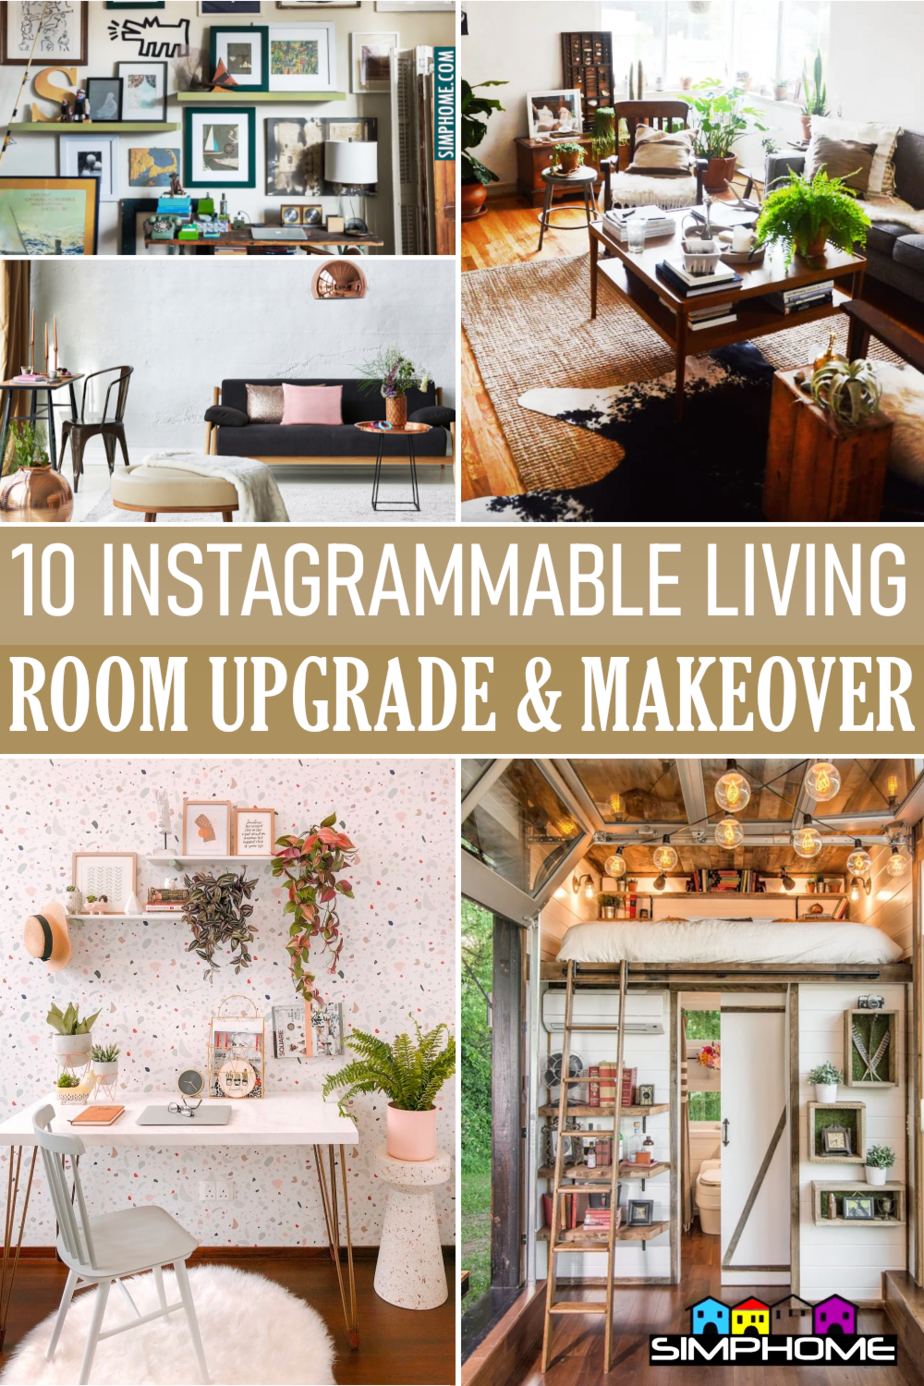 10 Instagrammable Living Room Upgrade Ideas via Simphome.comFeatured